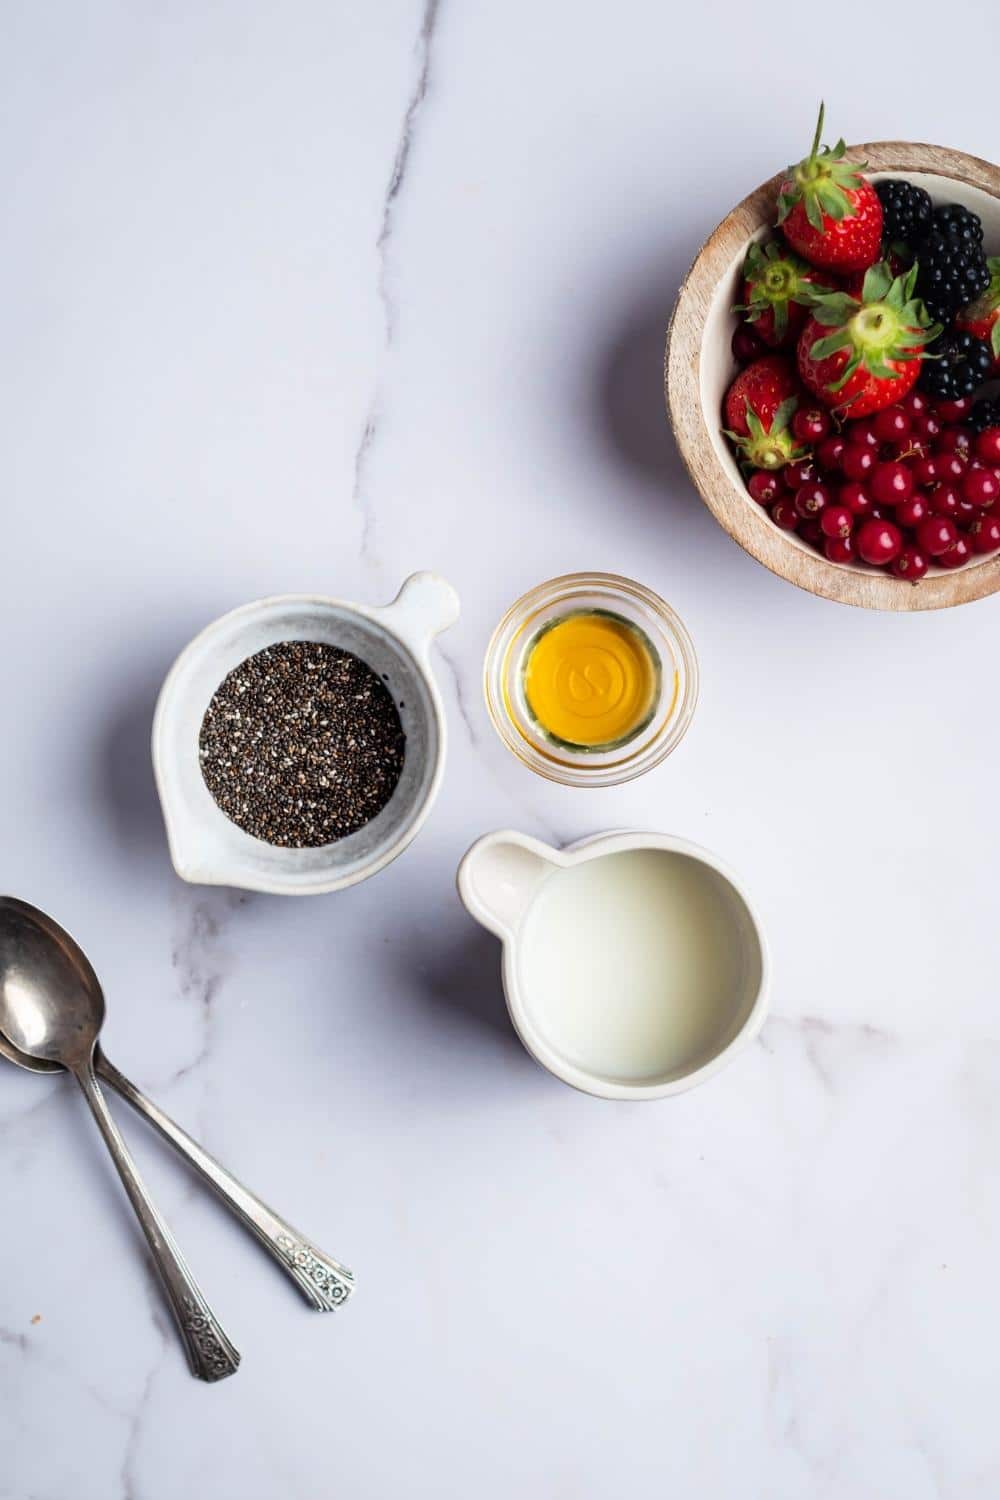 Chia seeds in a bowl, milk in a bowl, honey in a bowl, and fresh berries in a bowl.